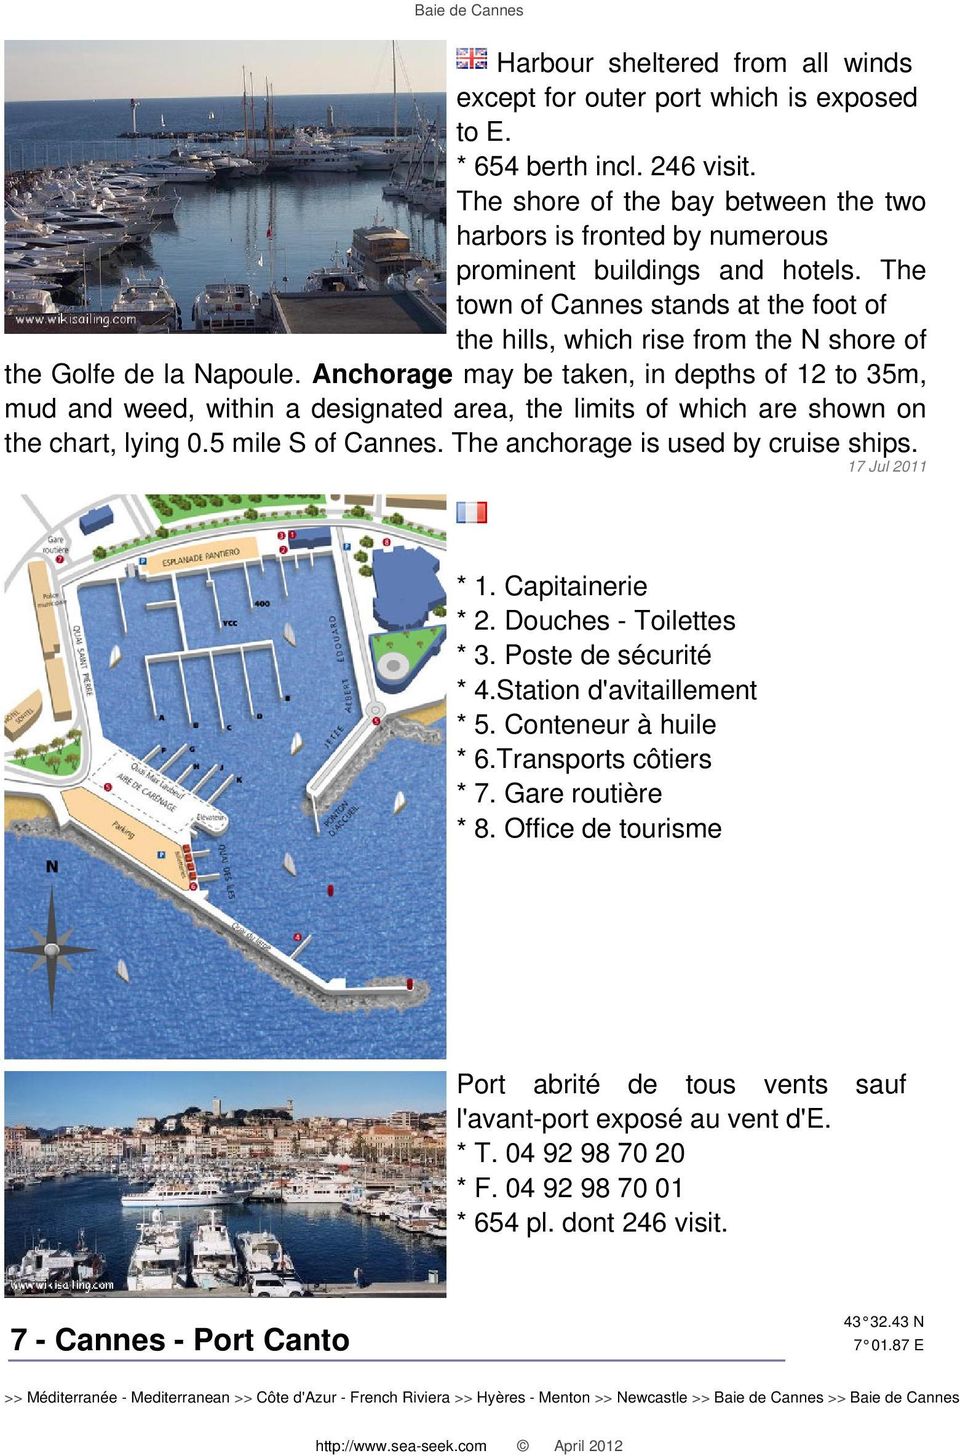 The town of Cannes stands at the foot of the hills, which rise from the N shore of the Golfe de la Napoule.